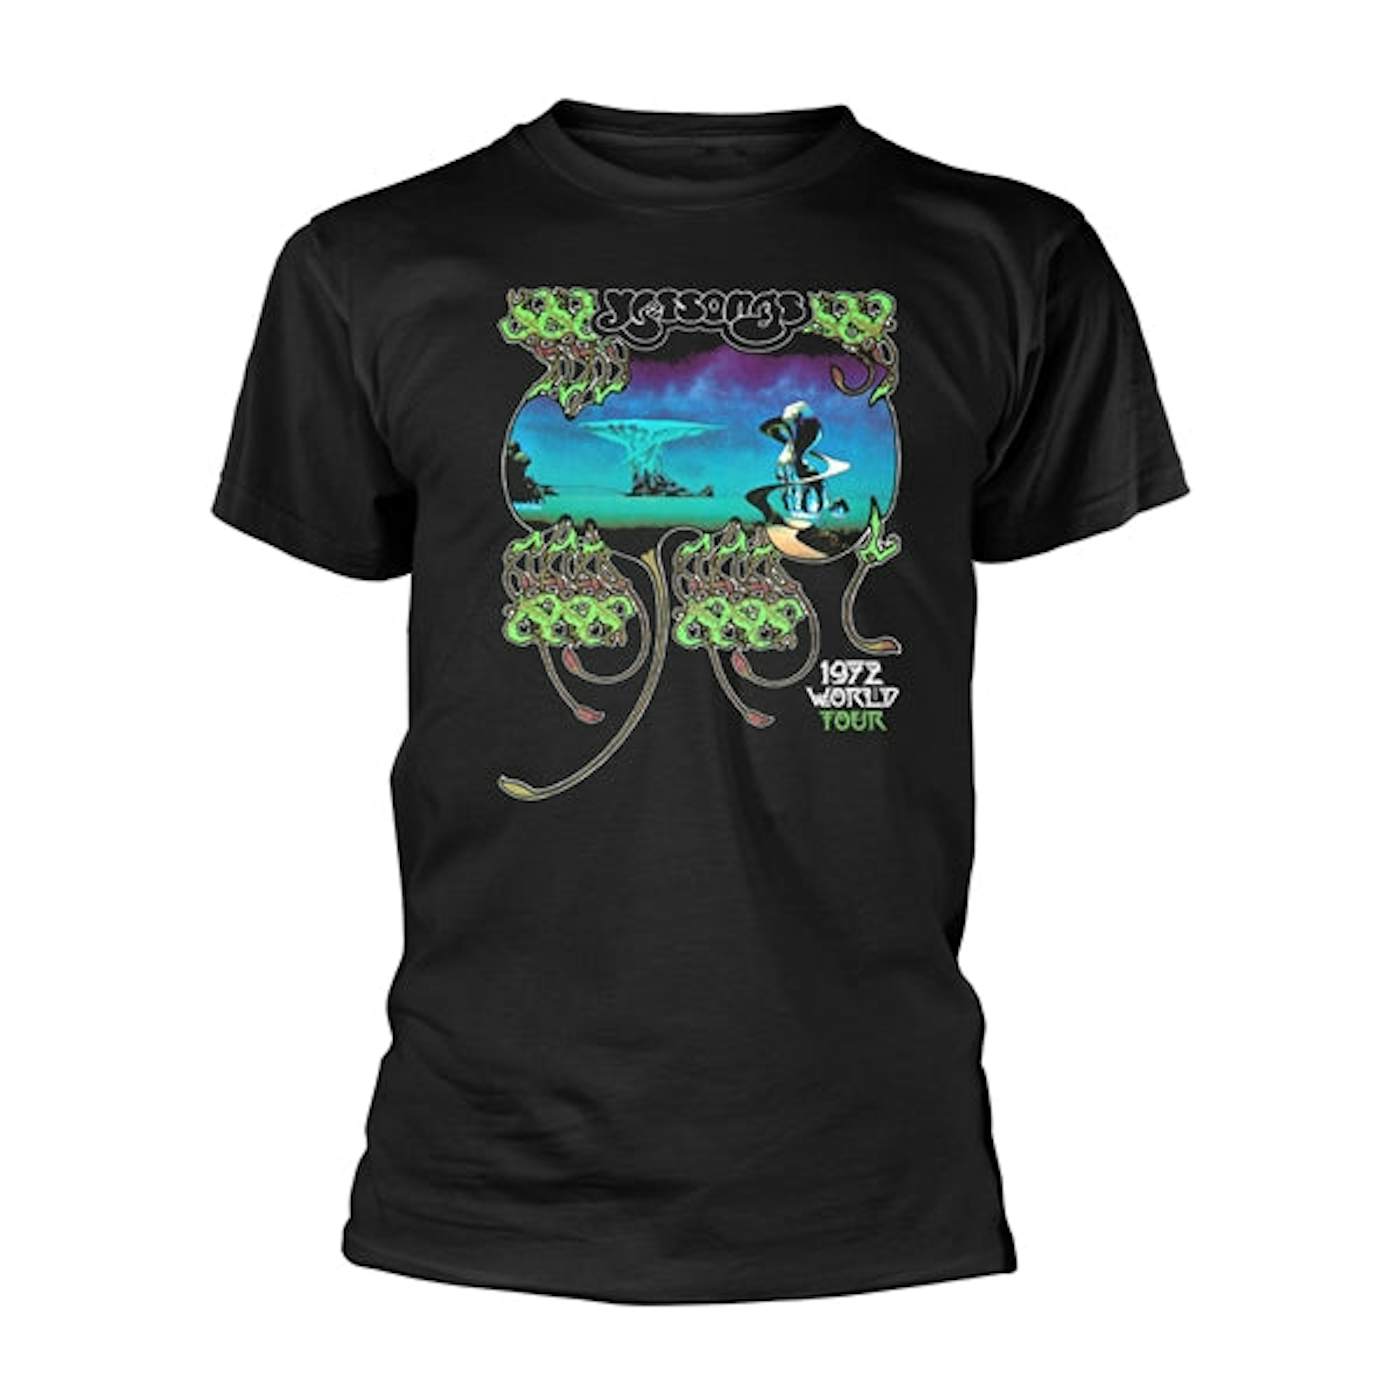 Yes T-Shirt - Yessongs